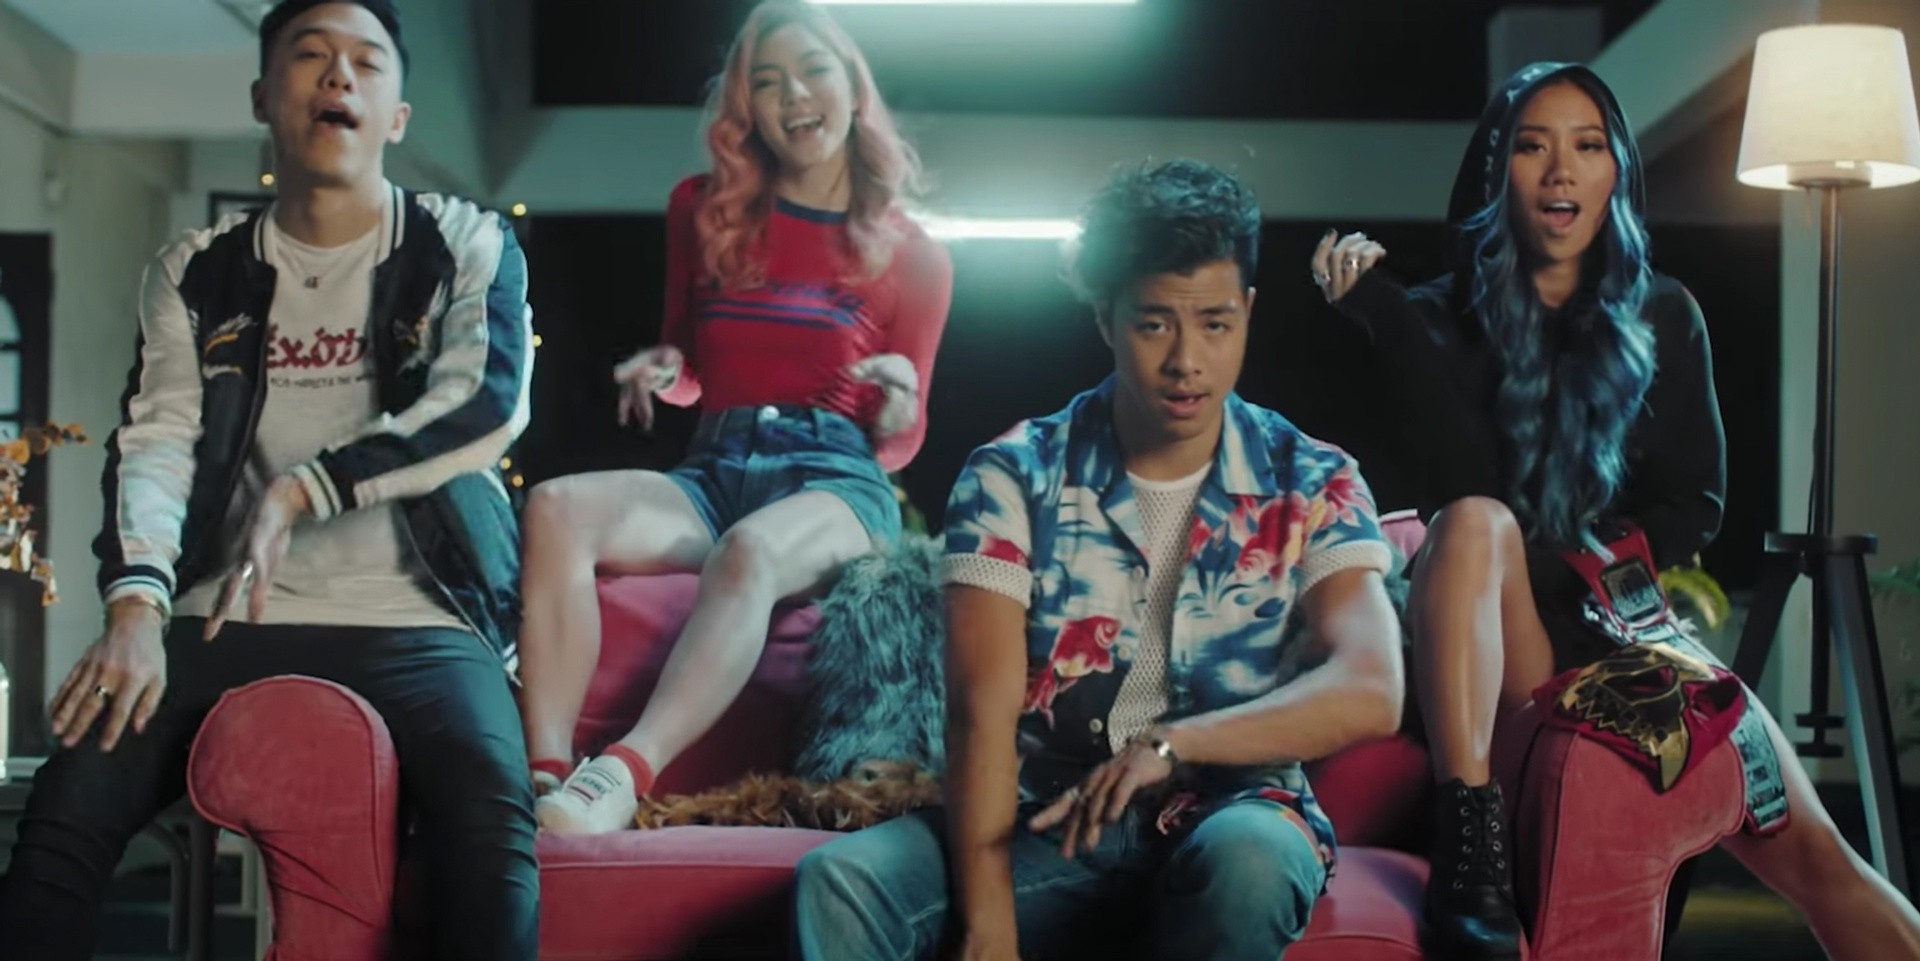 The Sam Willows' music videos for 'Robot' and 'Papa Money' could not be more different — watch